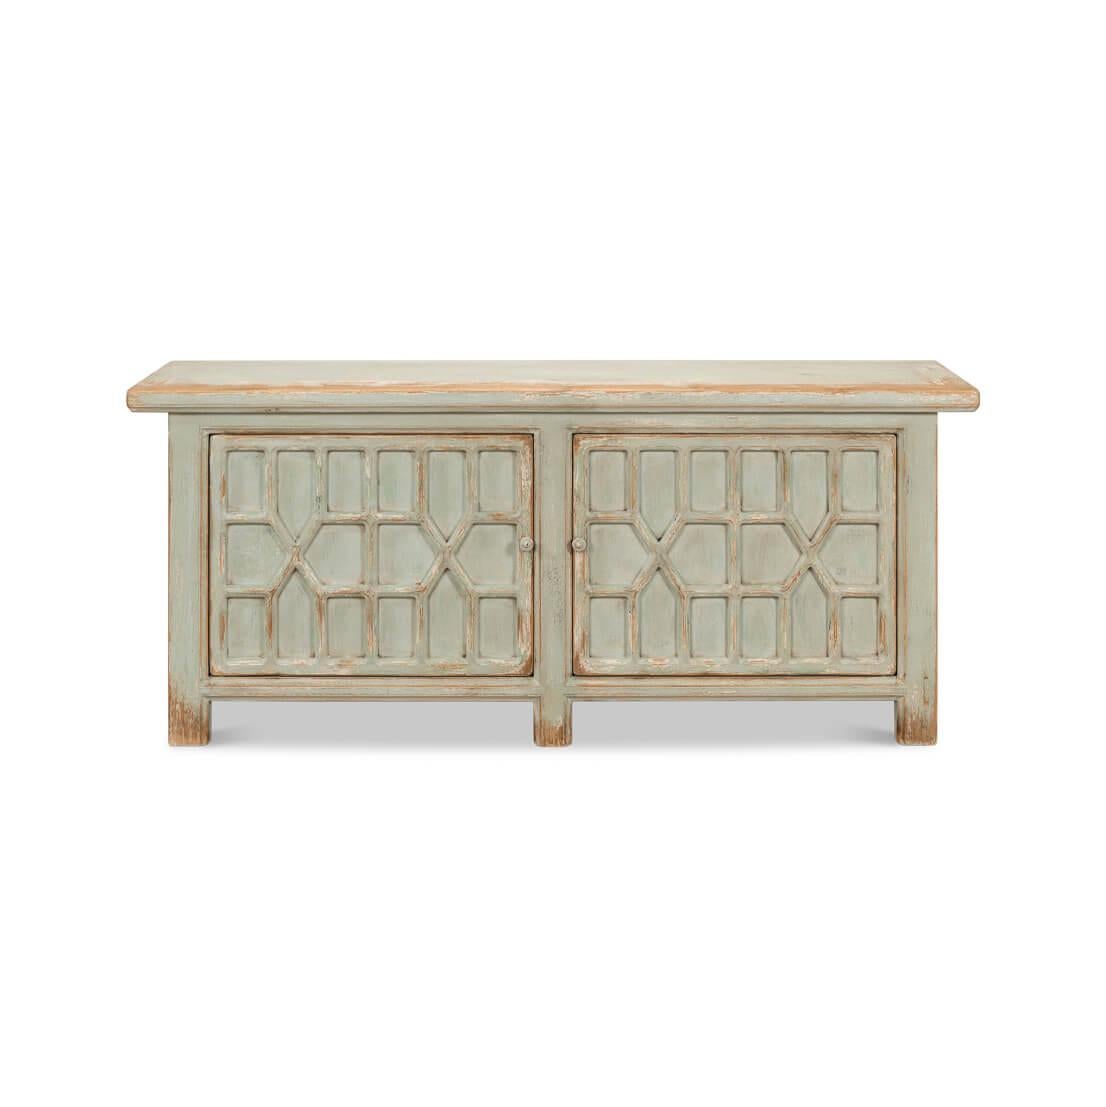 A piece that marries rustic allure with geometric sophistication. This sideboard features a soothing, sage green finish, subtly weathered to reveal hints of natural wood, suggesting a life alongside ocean breezes and salt spray.

The intricate